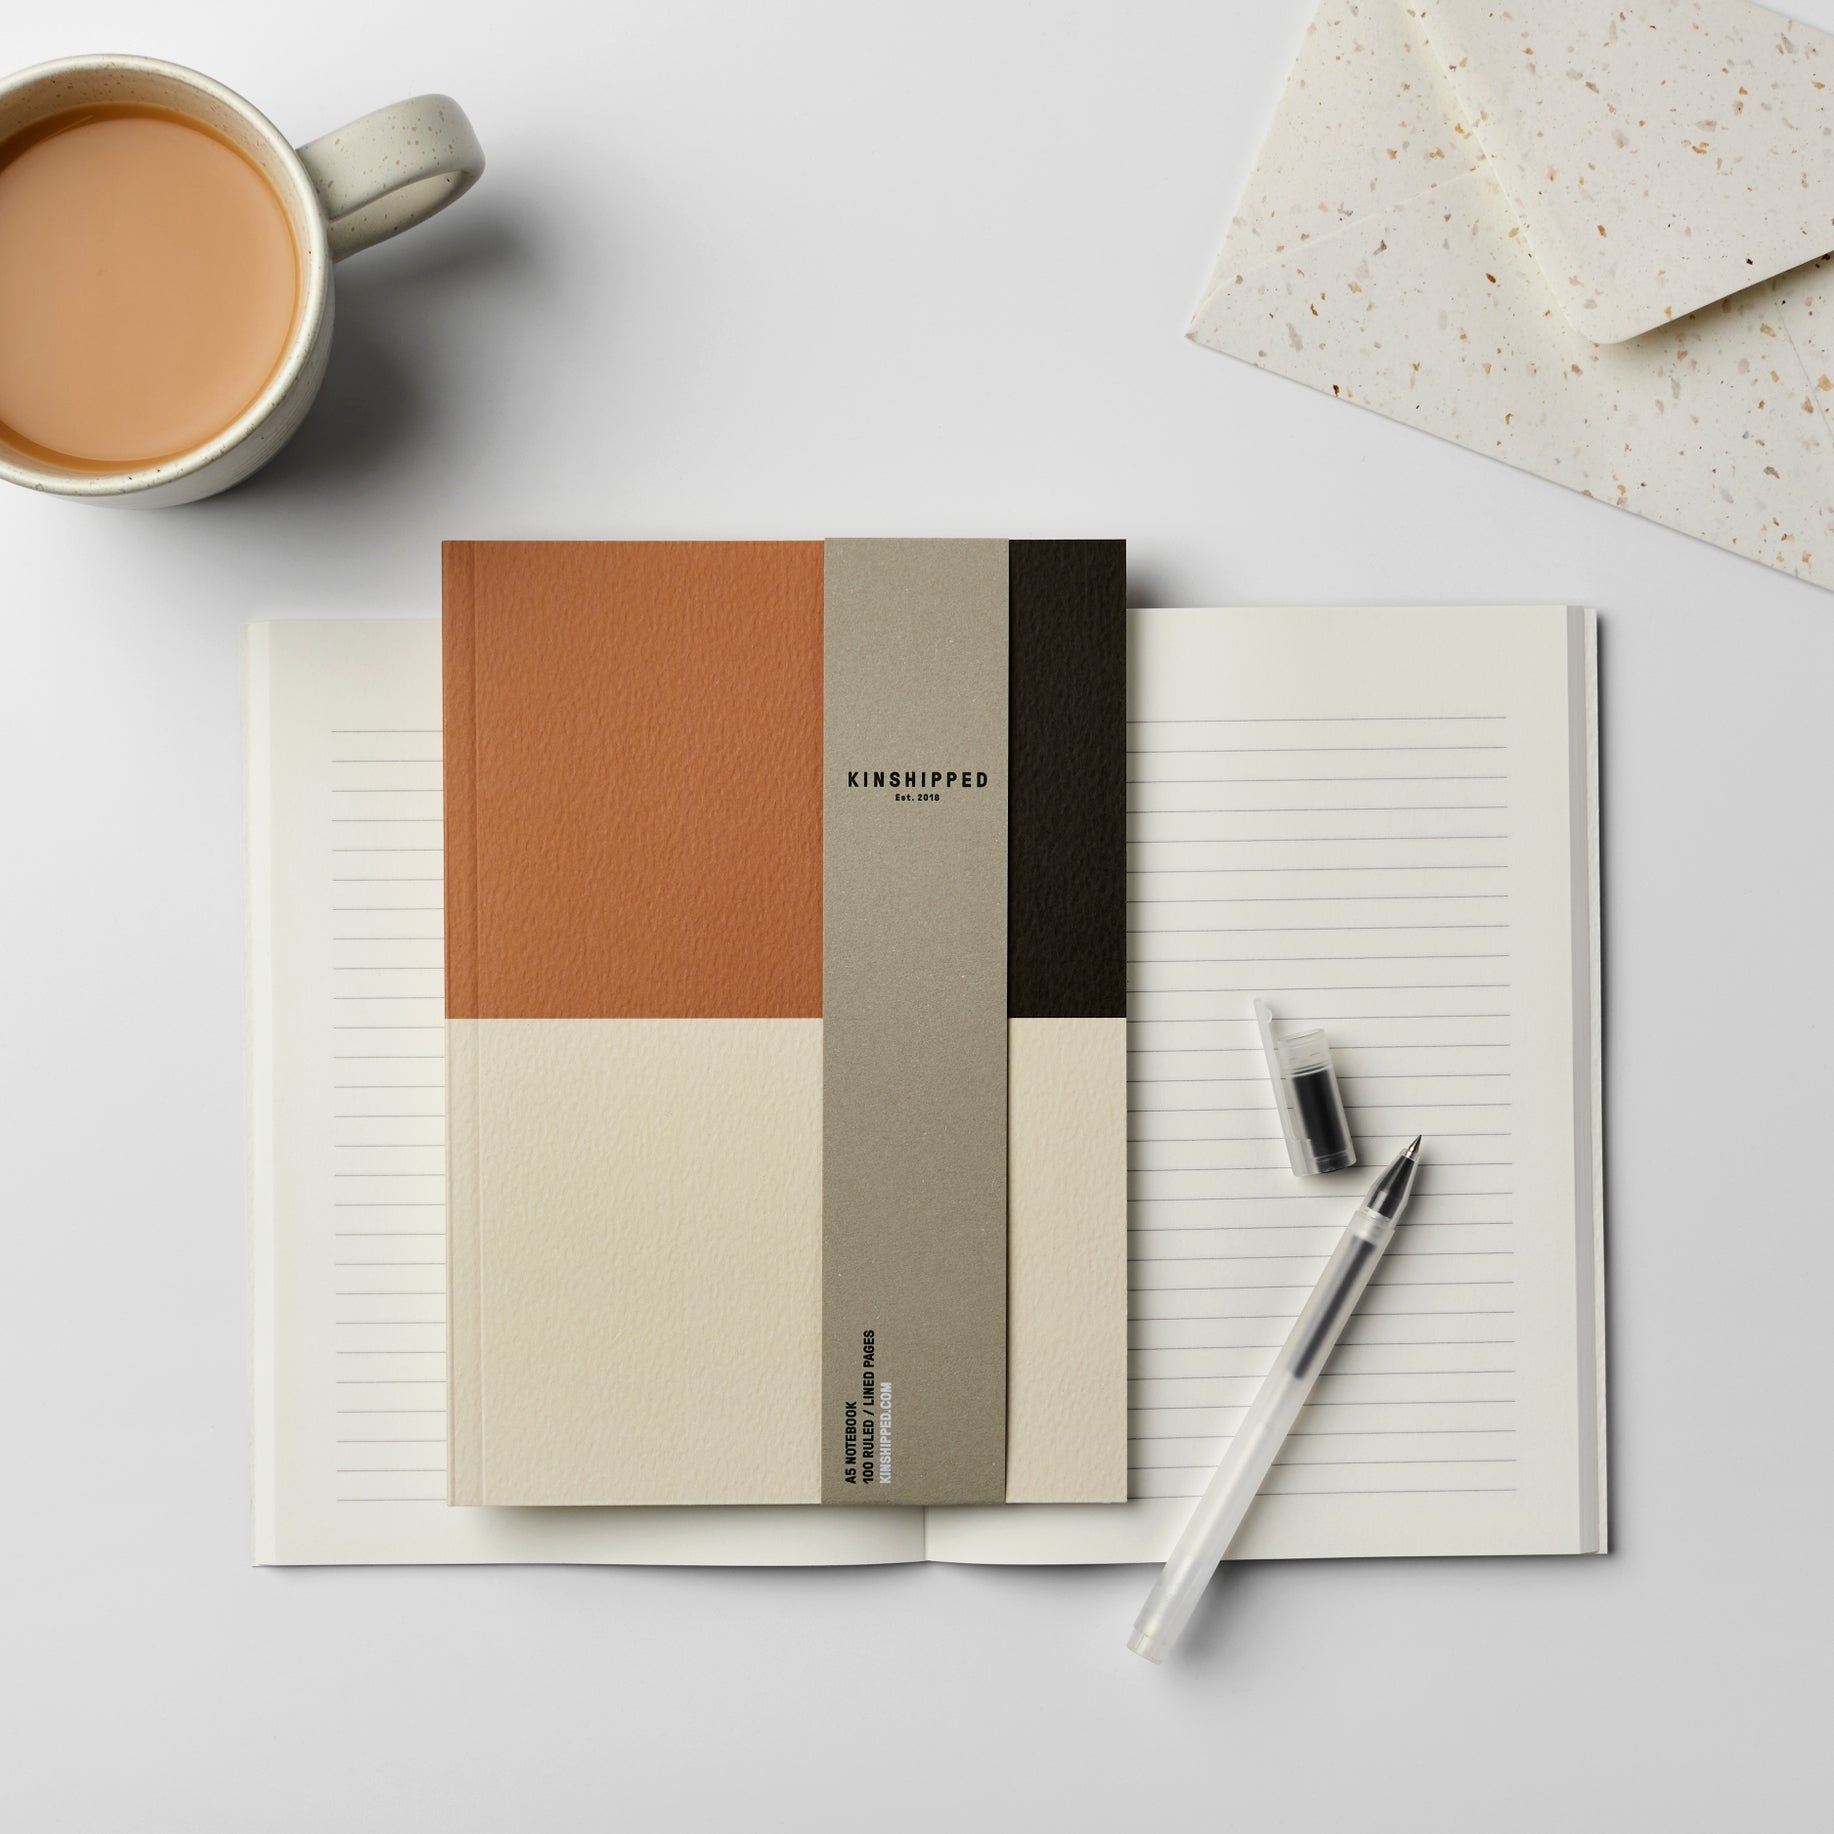 100 Pages of beautifully smooth, lined, music sheet paper – covered with a gorgeous, textured and thick FSC GF Smith Paper. Made in the UK, these notebooks are not only sustainable, but perfect flatlay fodder.